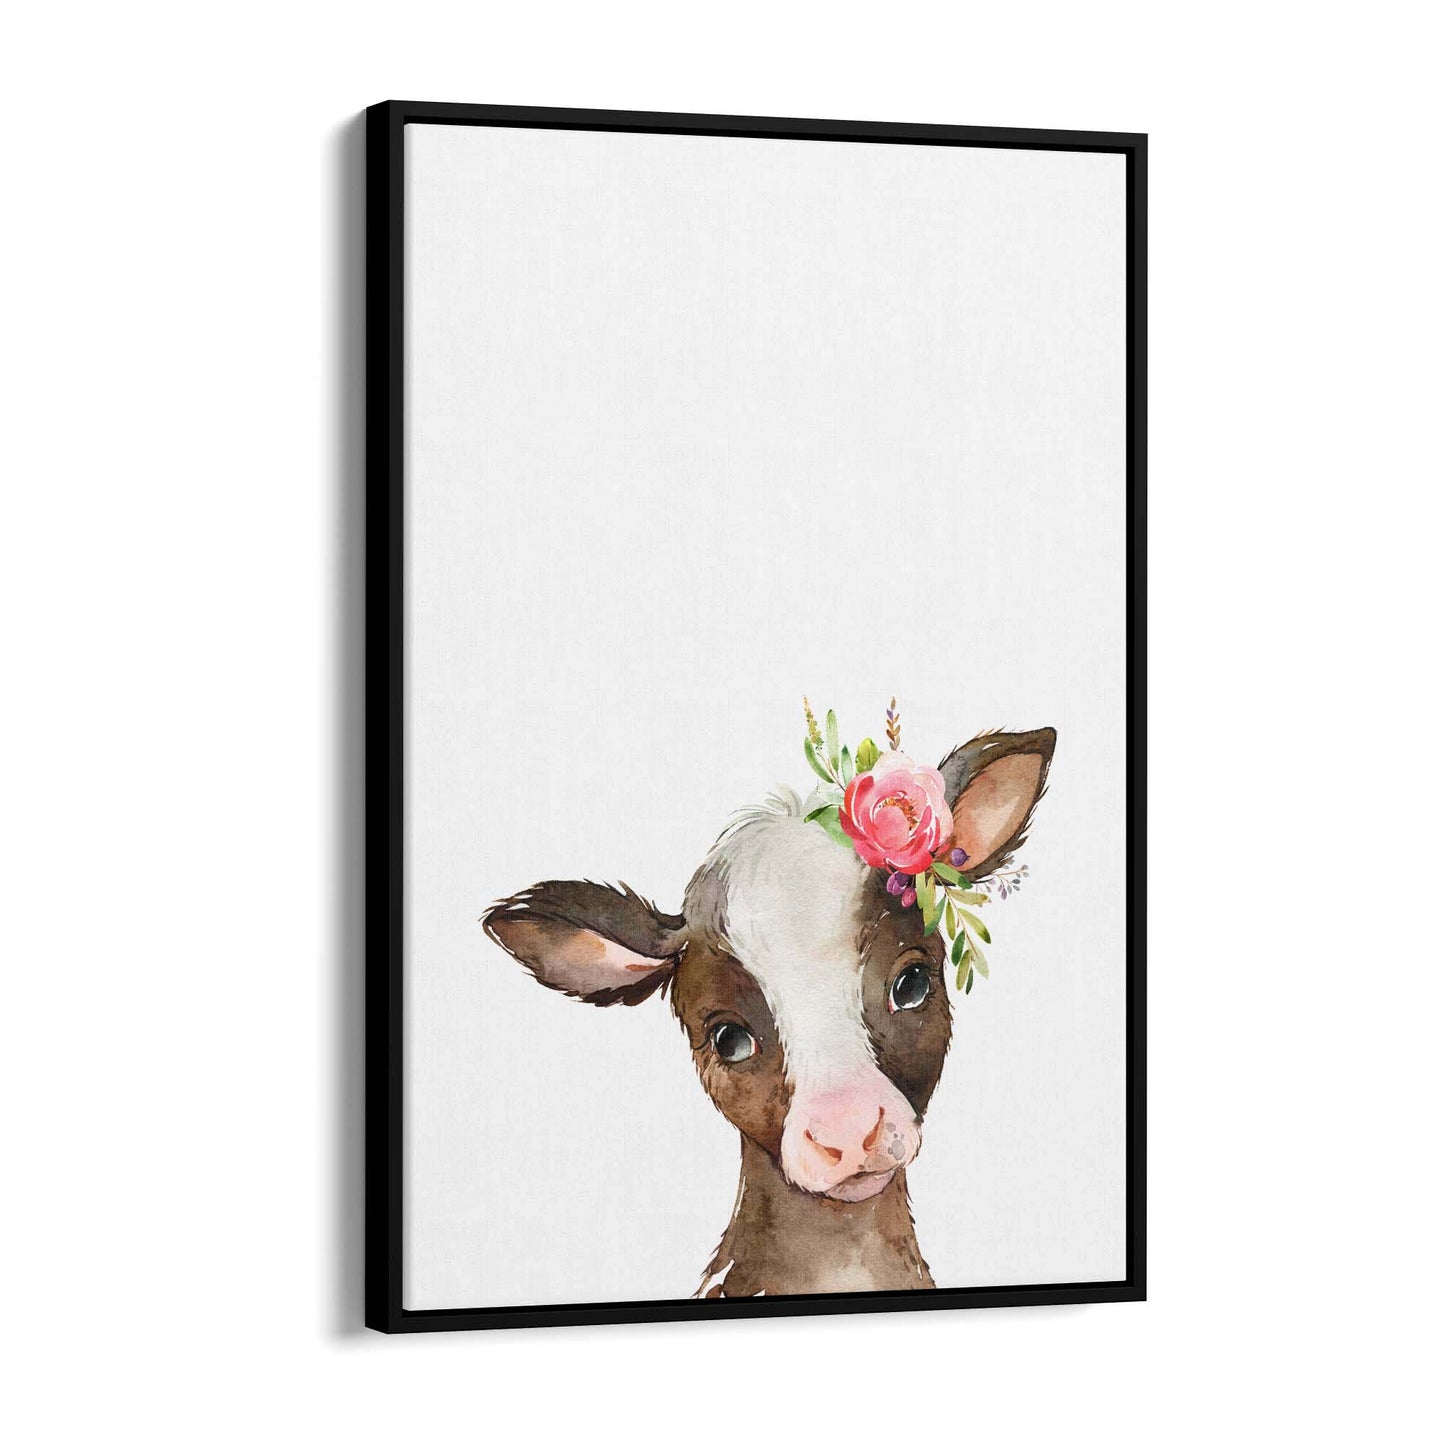 Cute Baby Cow Nursery Animal Gift Wall Art #2 - The Affordable Art Company